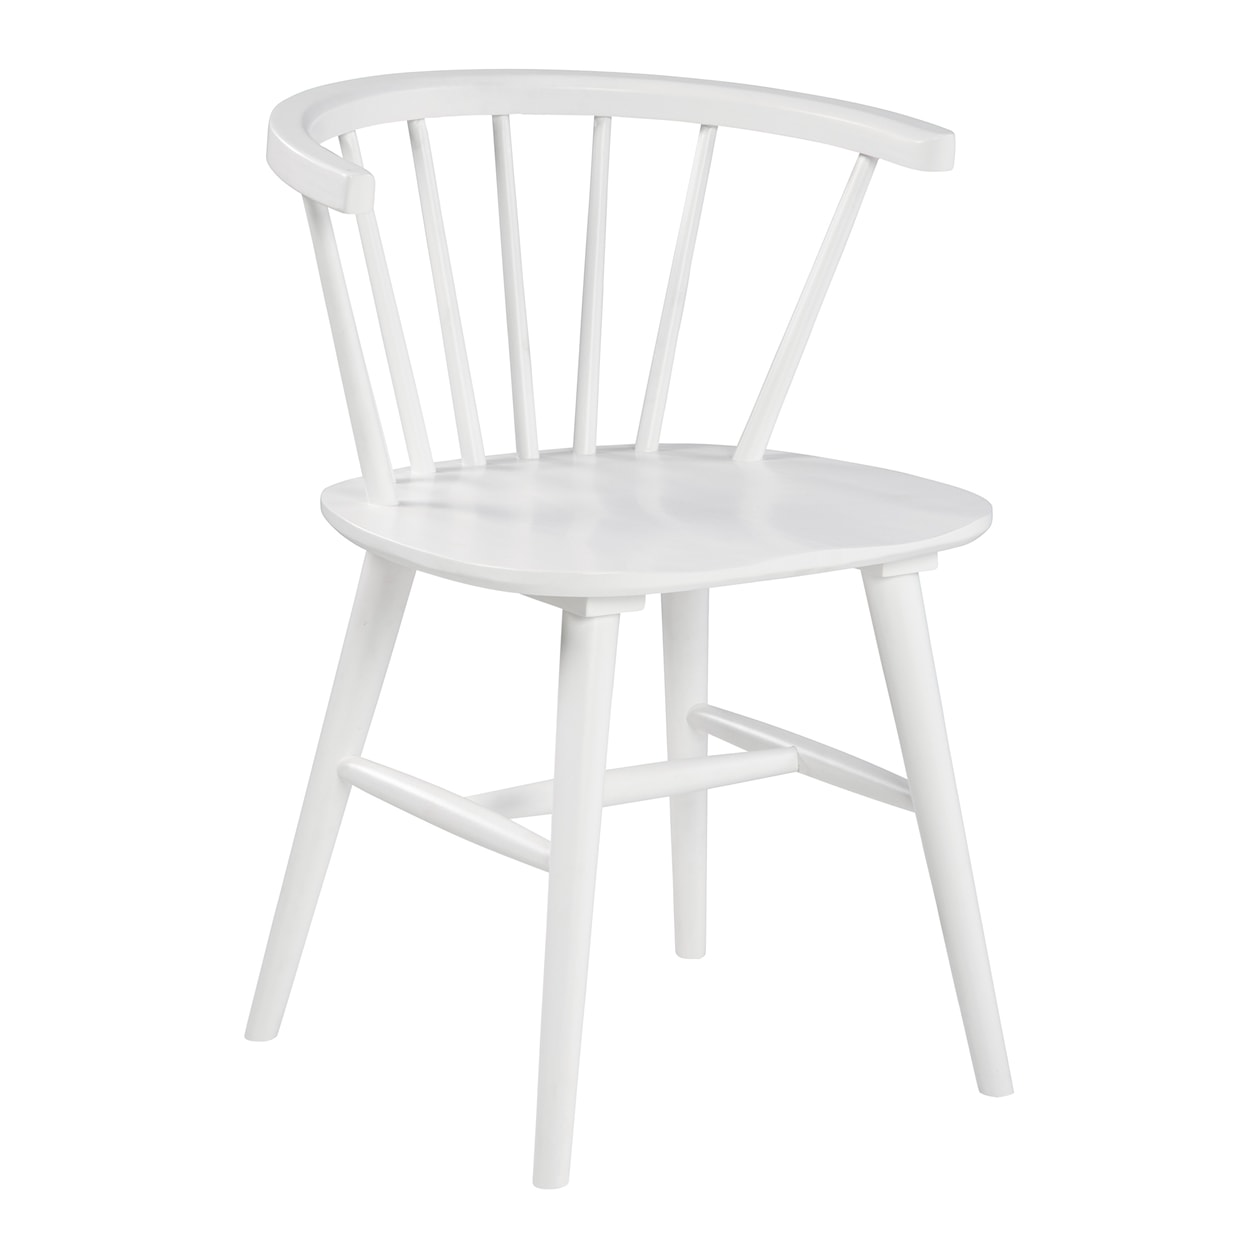 Signature Design by Ashley Grannen Dining Chair